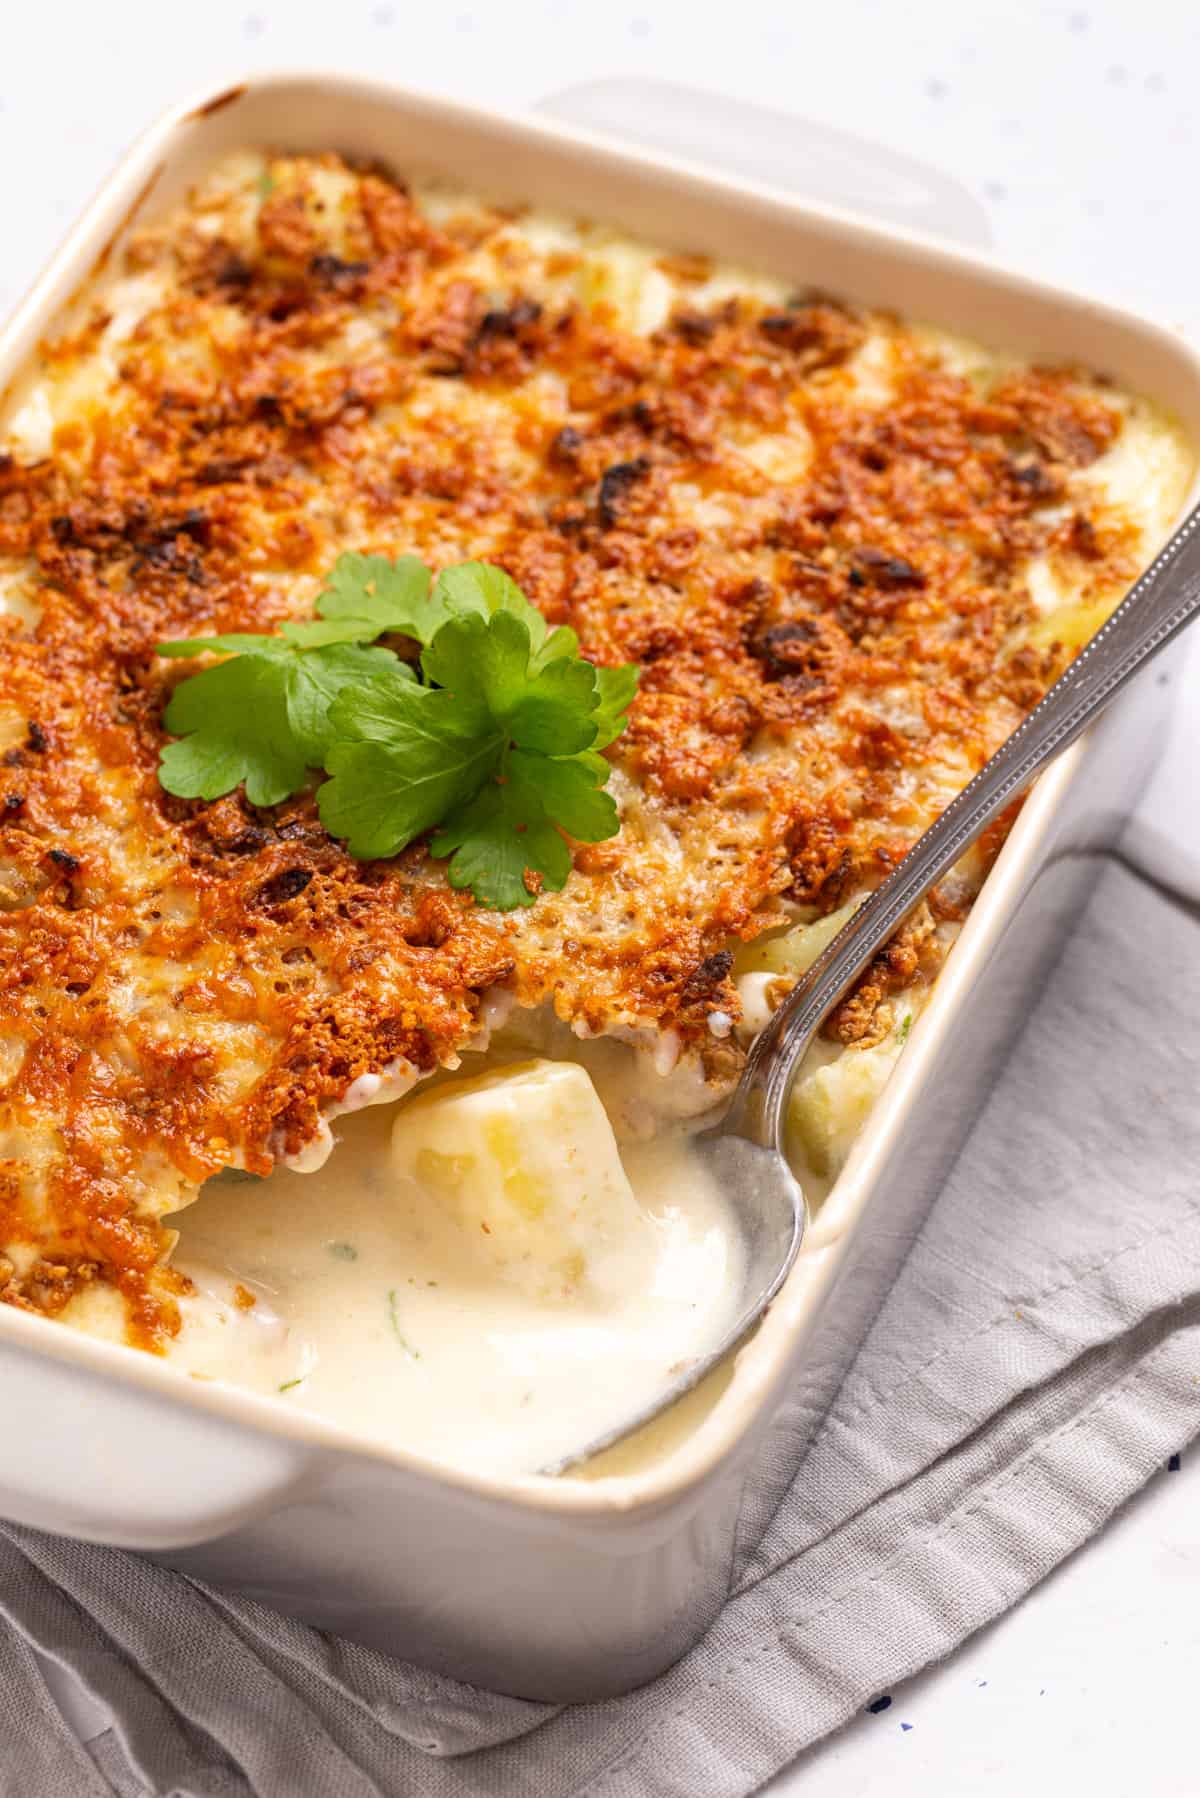 A close up image of baked cheesy potatoes with a serving of it missing and a spoon resting on the missing portion.